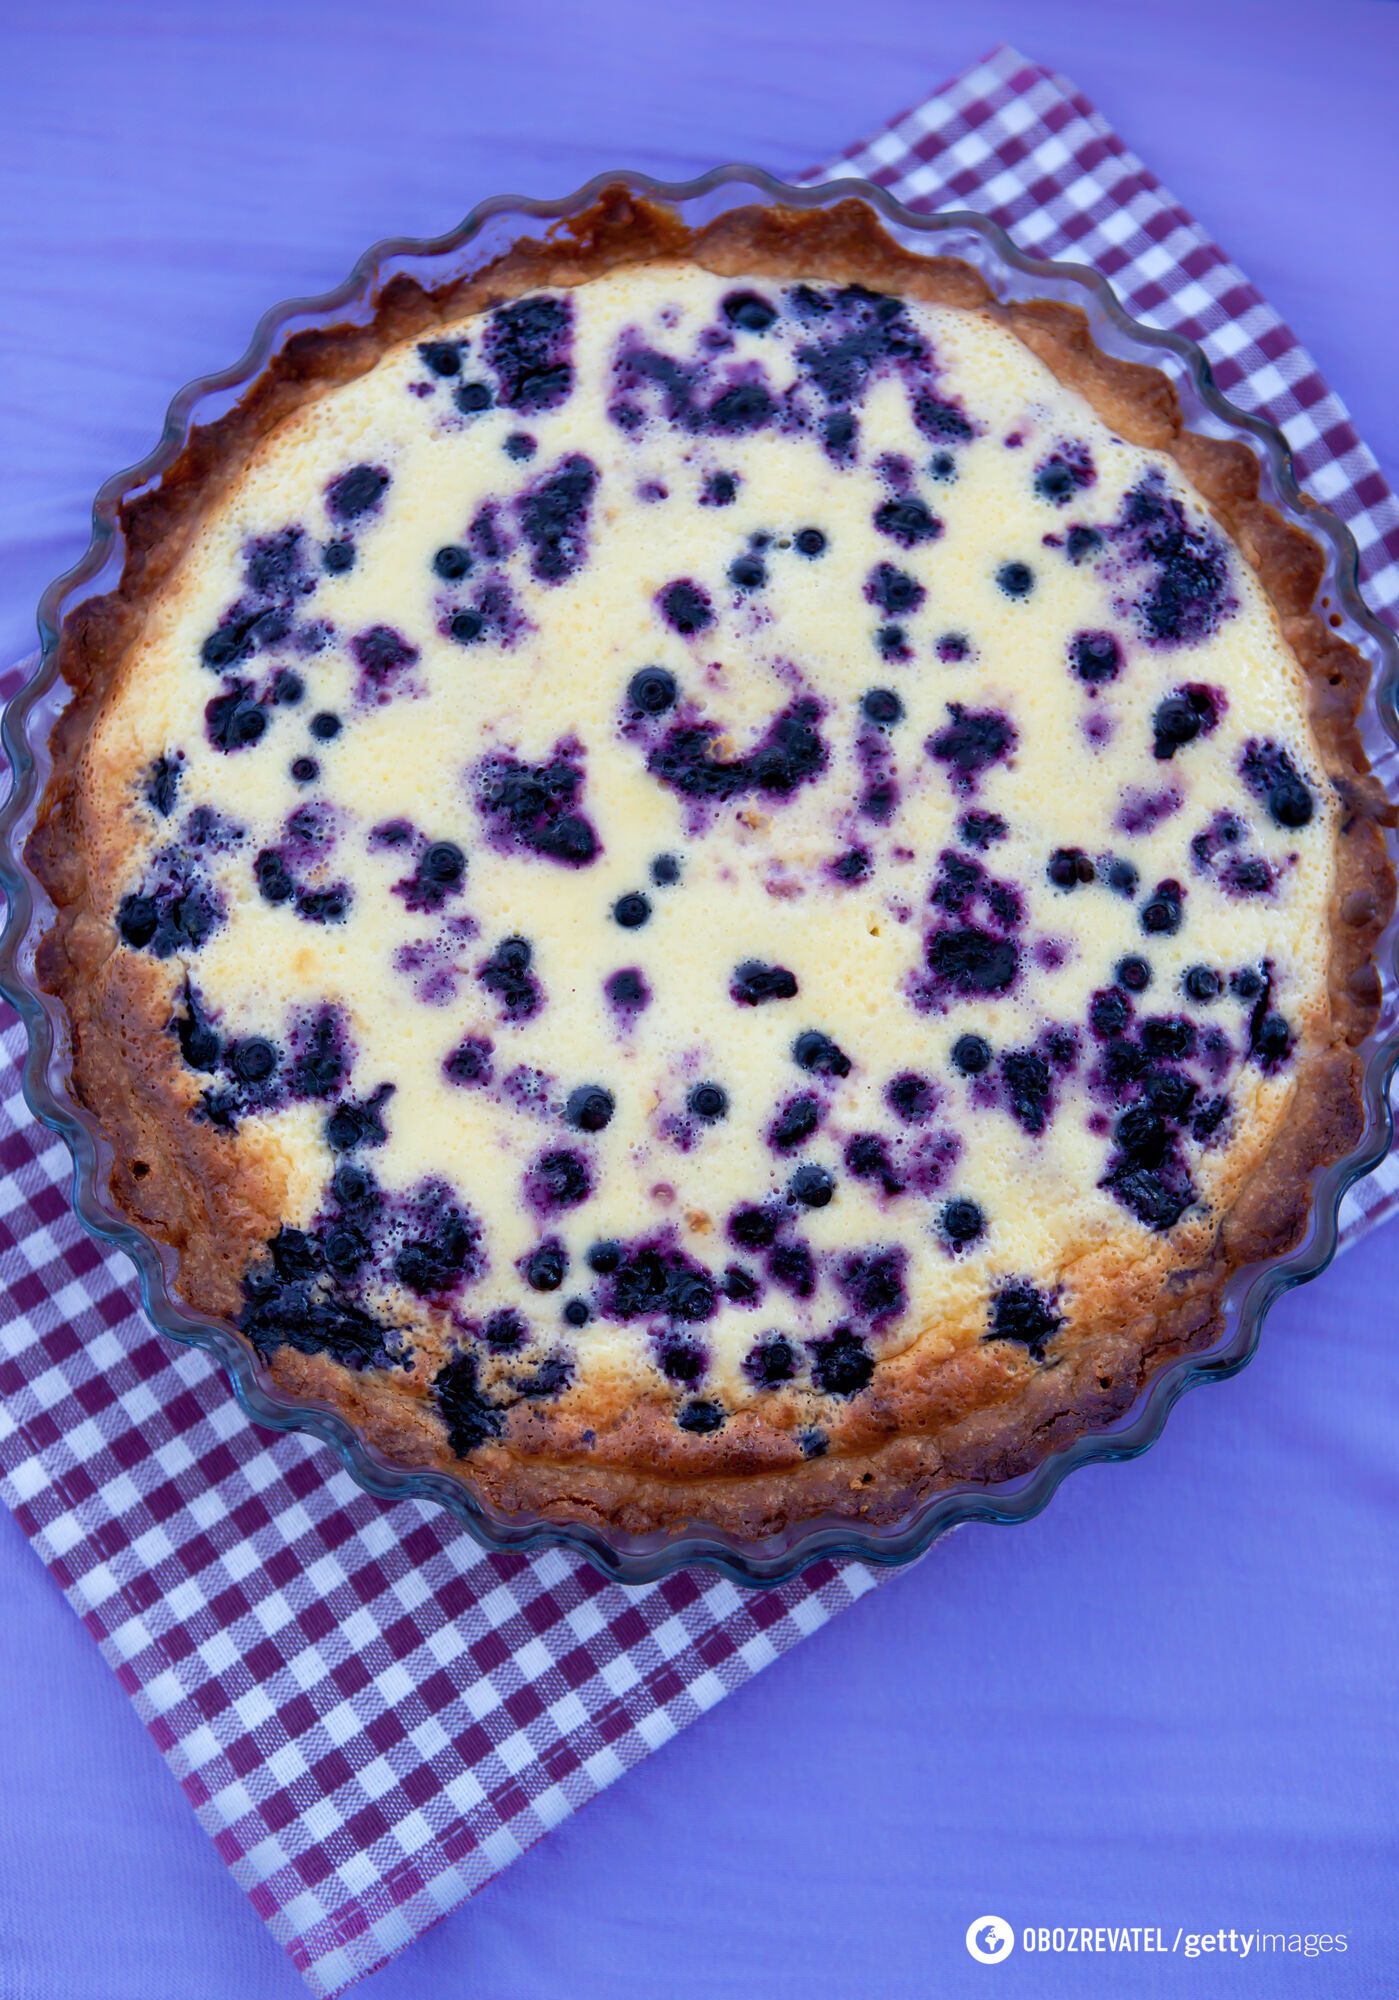 Homemade pie with blueberries and sour cream filling